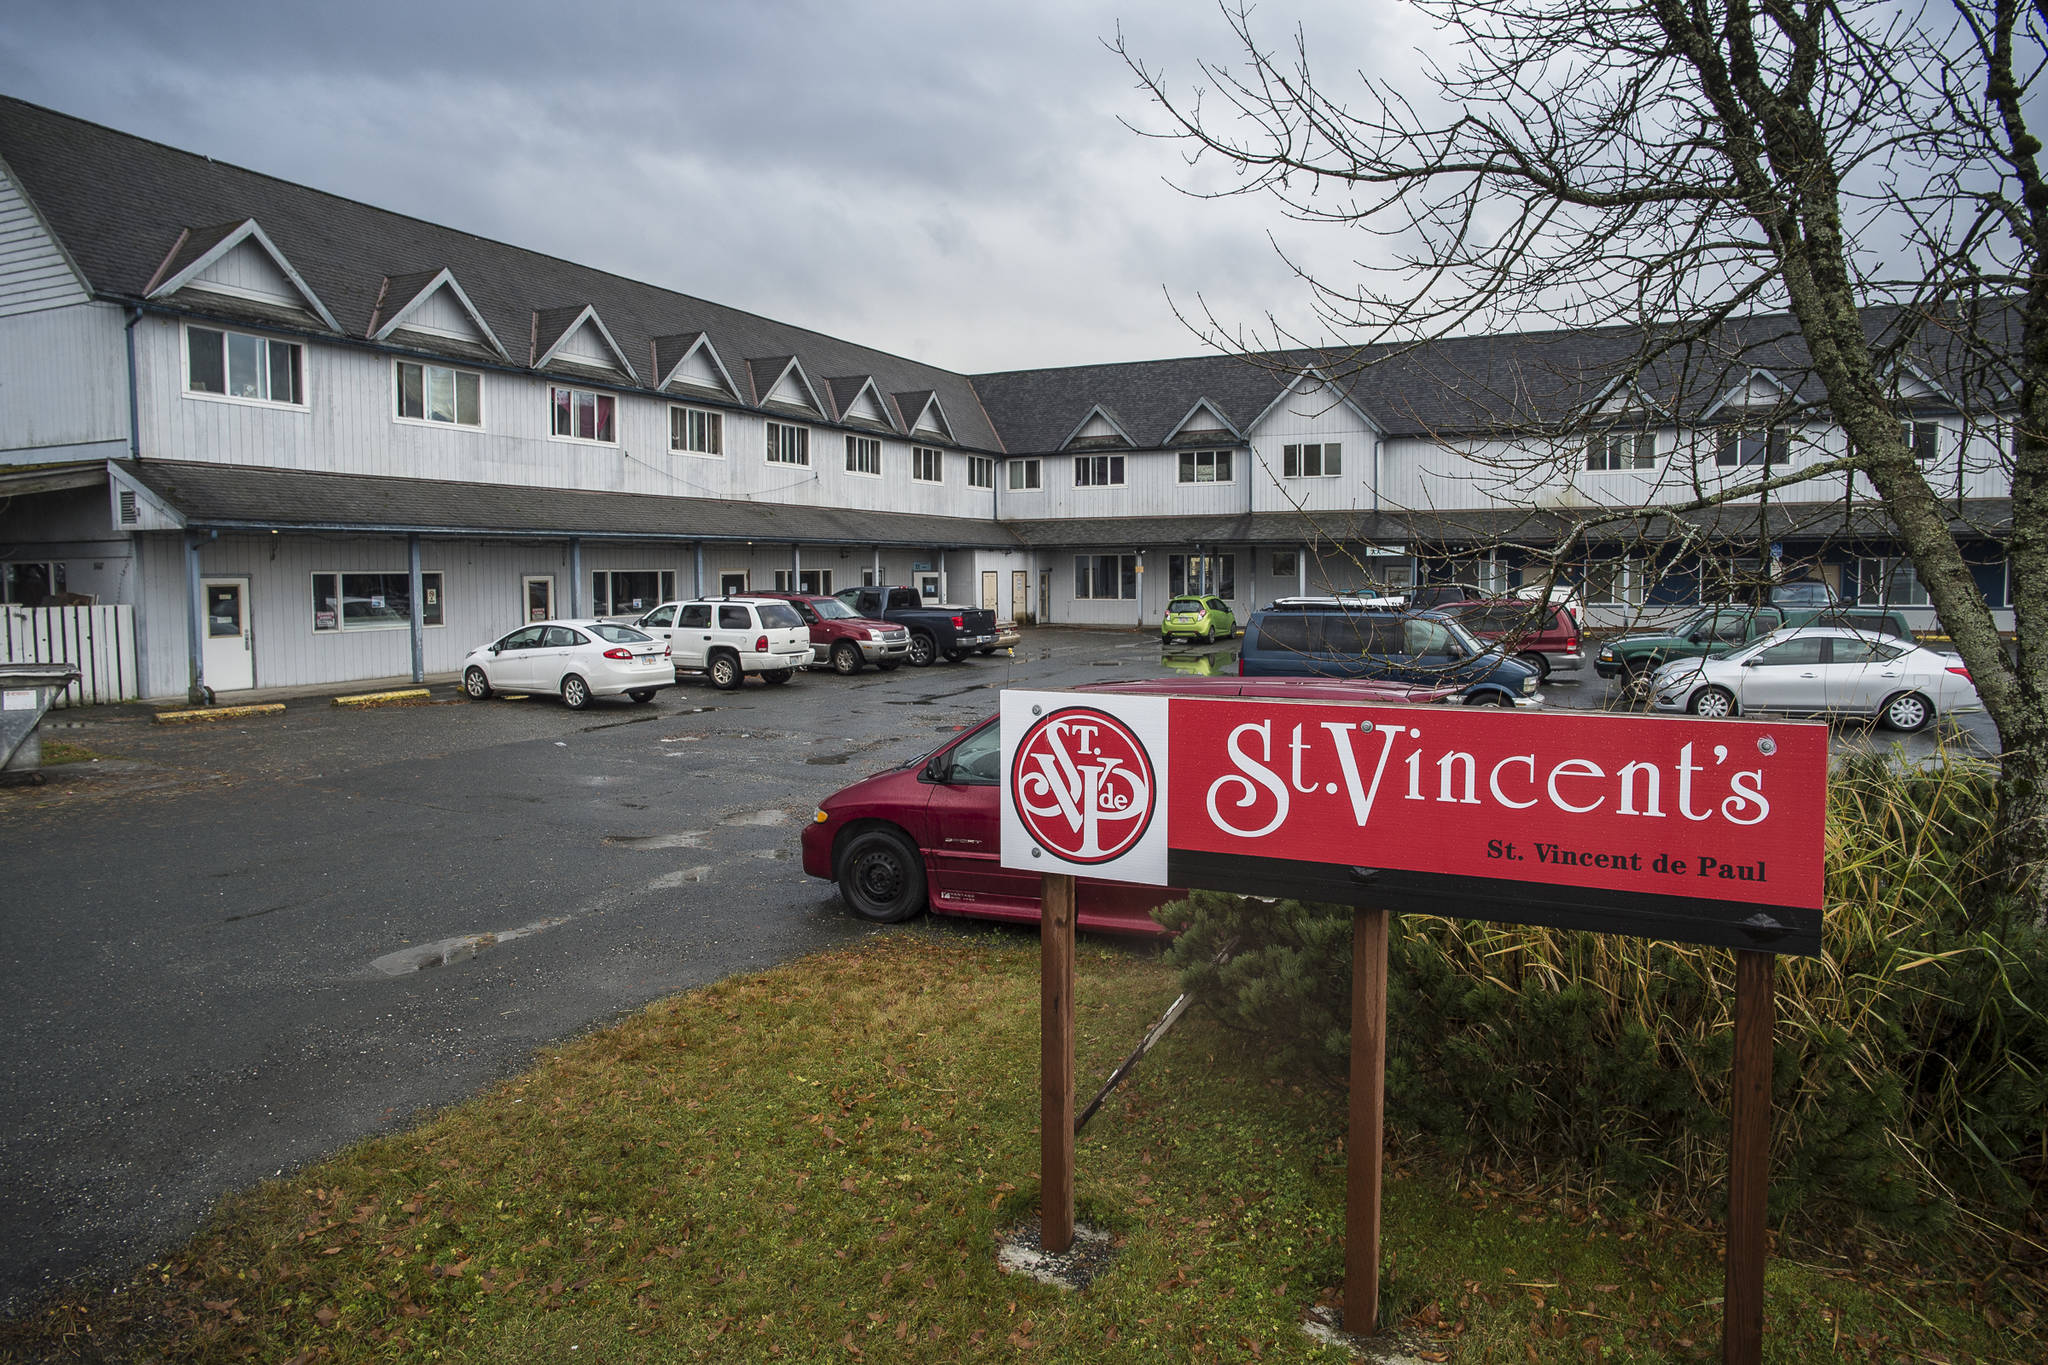 St. Vincent’s de Paul is looking to provide more services now that their thrift store has moved to a new location. (Michael Penn | Juneau Empire)